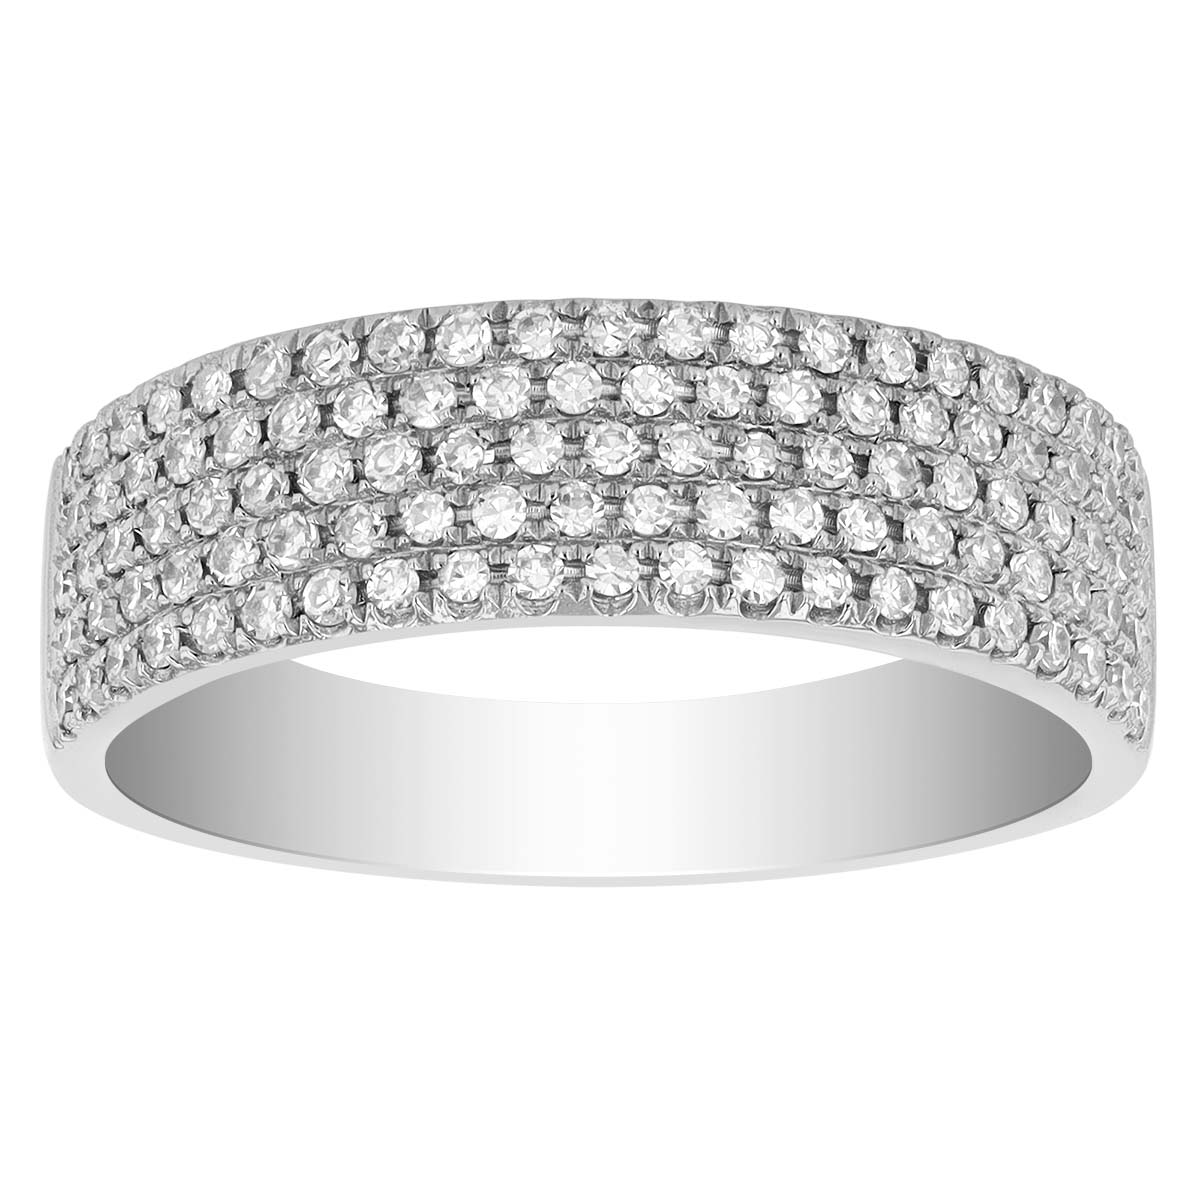 Diamond Pavé Wide Band Ring in White Gold, 1.05 cttw | Borsheims